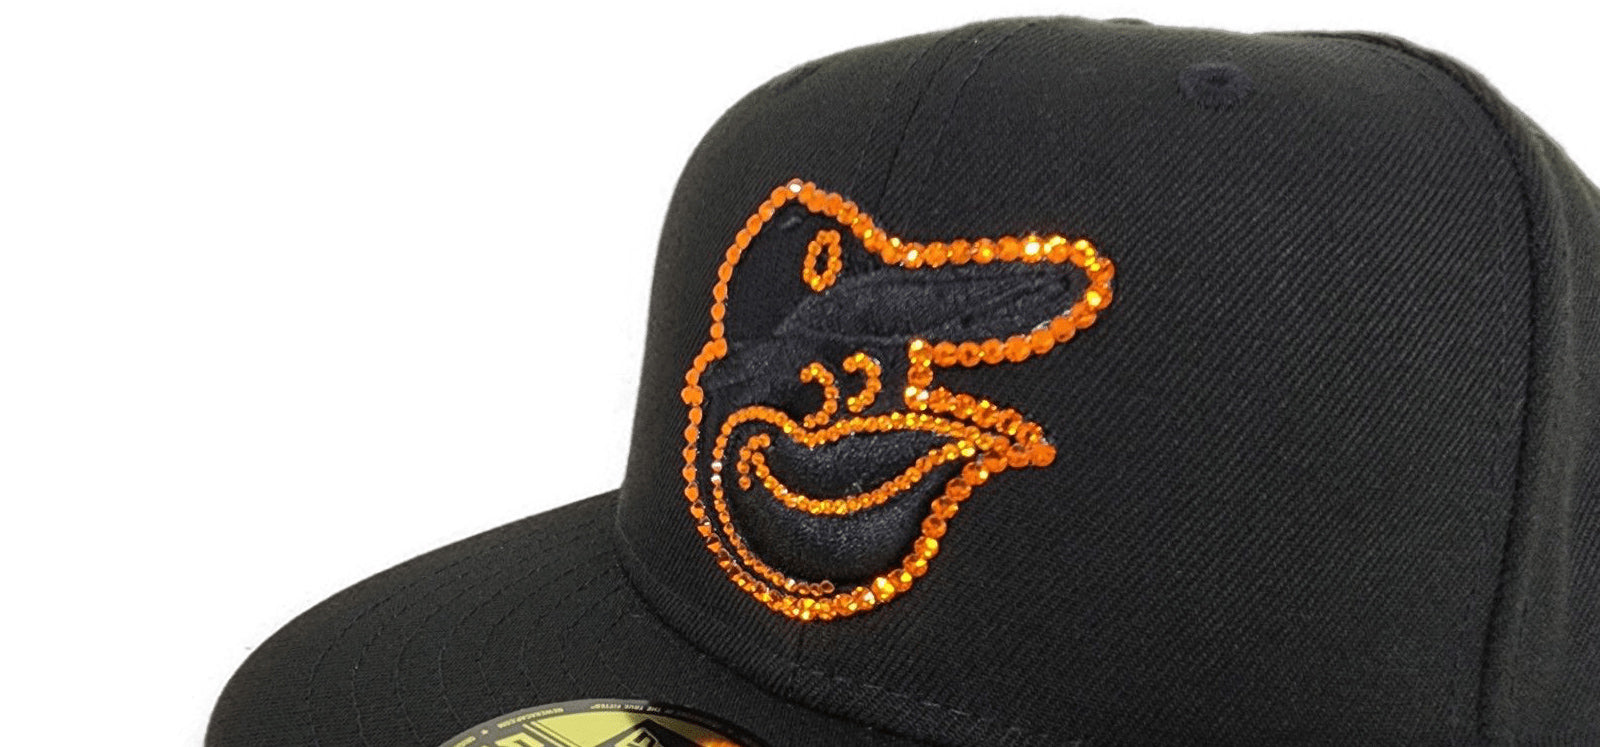 Swarovski Crystal Black Baltimore Orioles New Era 59Fifty Fitted